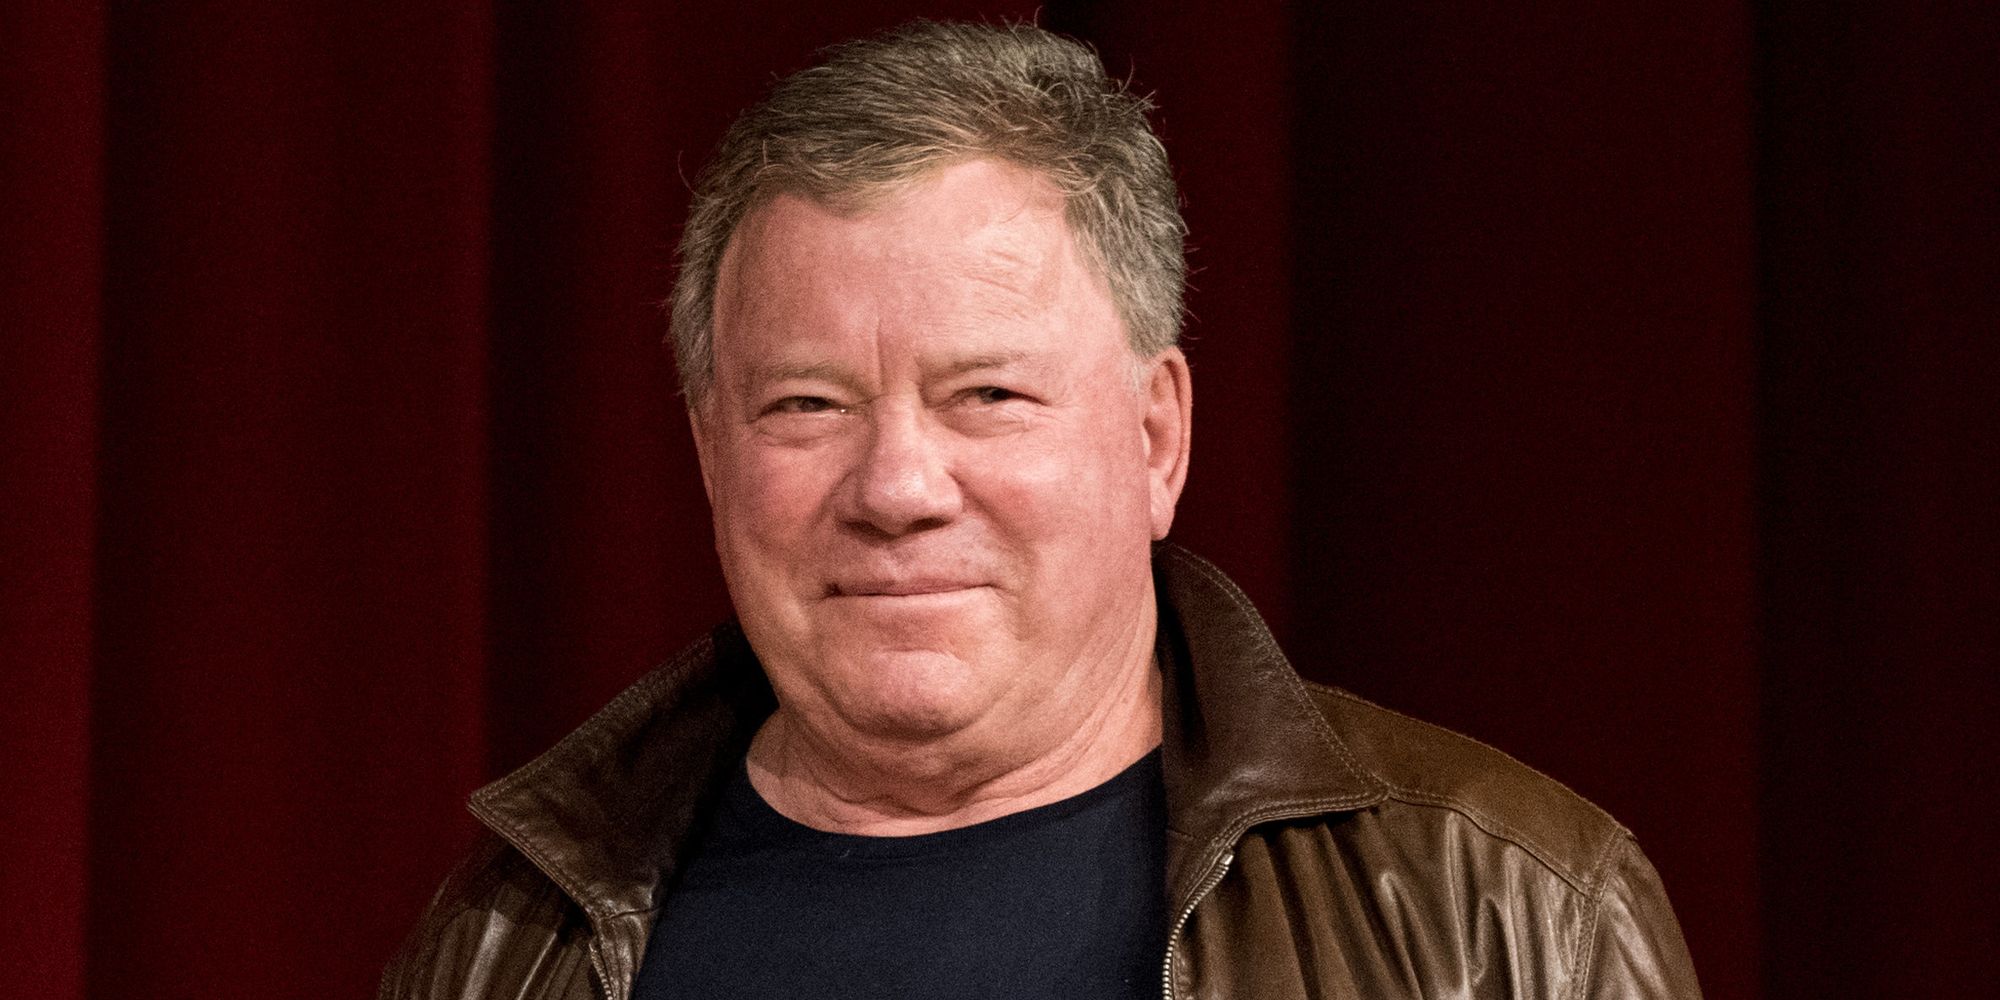 William Shatner Crosses Into 'Star Wars' Territory To Help Kid With Autism - Huffington Post